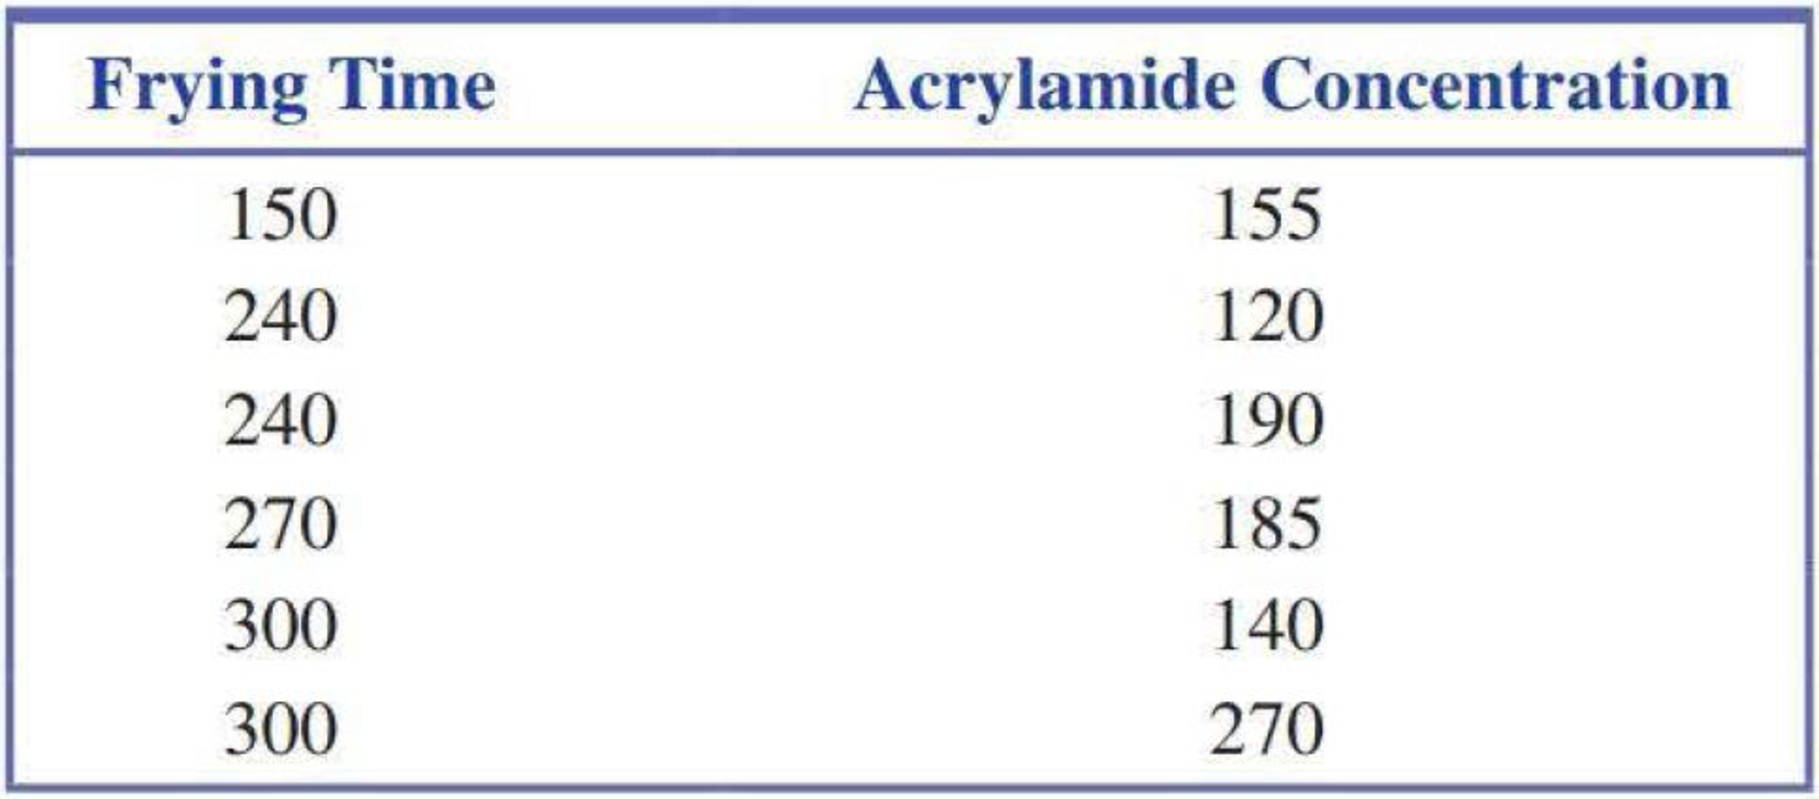 Chapter 5.3, Problem 41E, Consider the scatterplot of acrylamide concentration versus frying time from the previous exercise. 